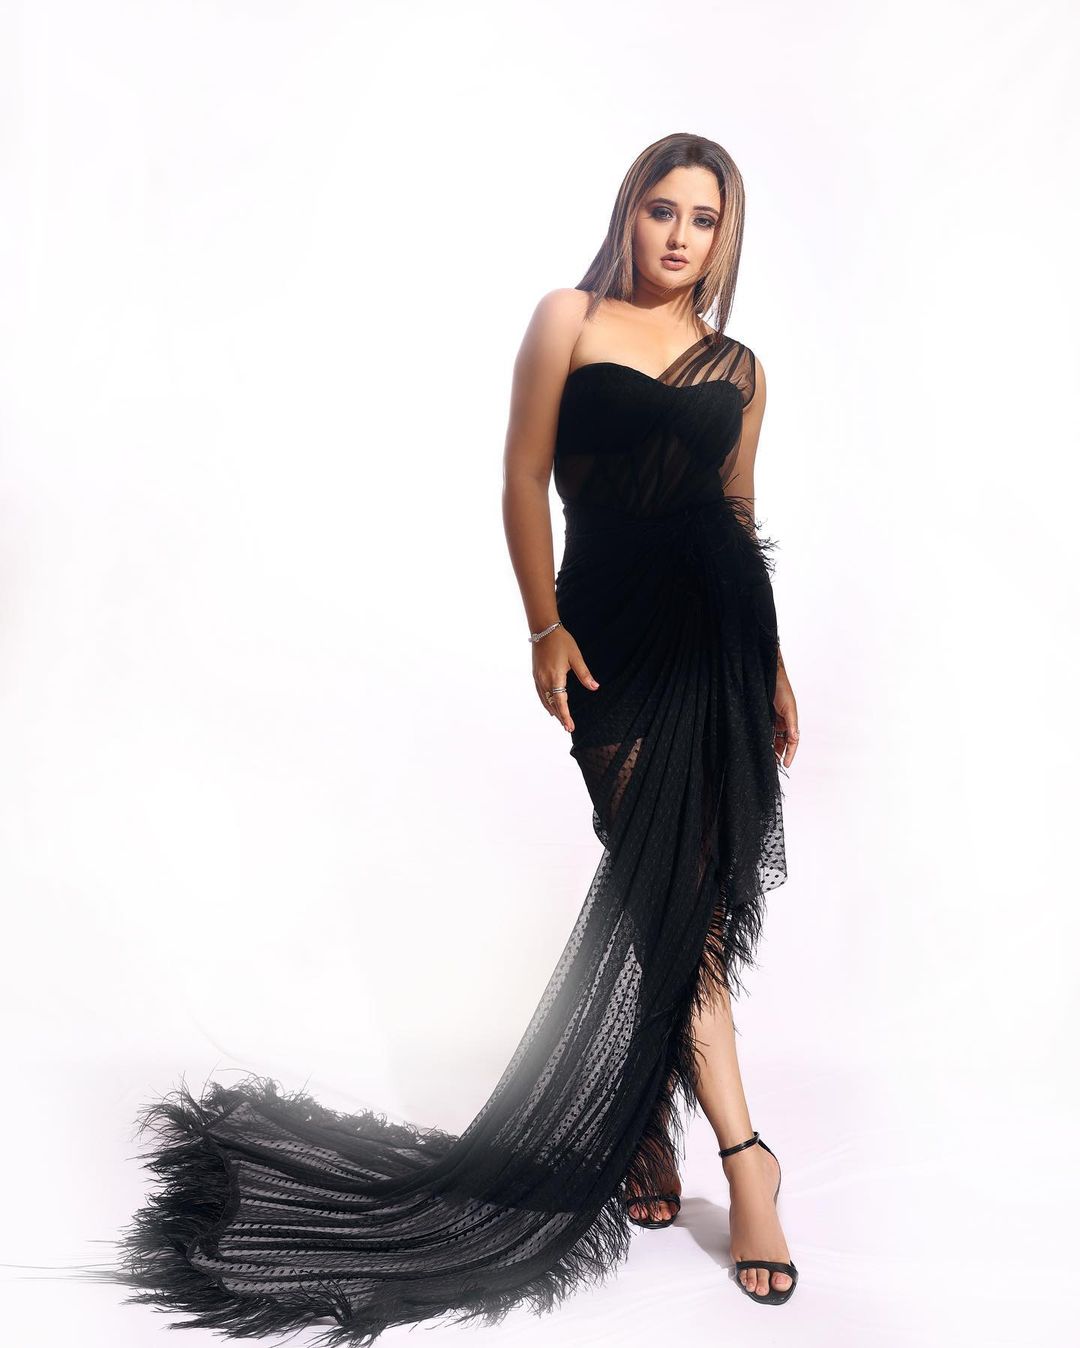 Amazing pictures of beautiful actress rashami desai-Actressrashami, Rashami Desai, Rashamidesai Photos,Spicy Hot Pics,Images,High Resolution WallPapers Download